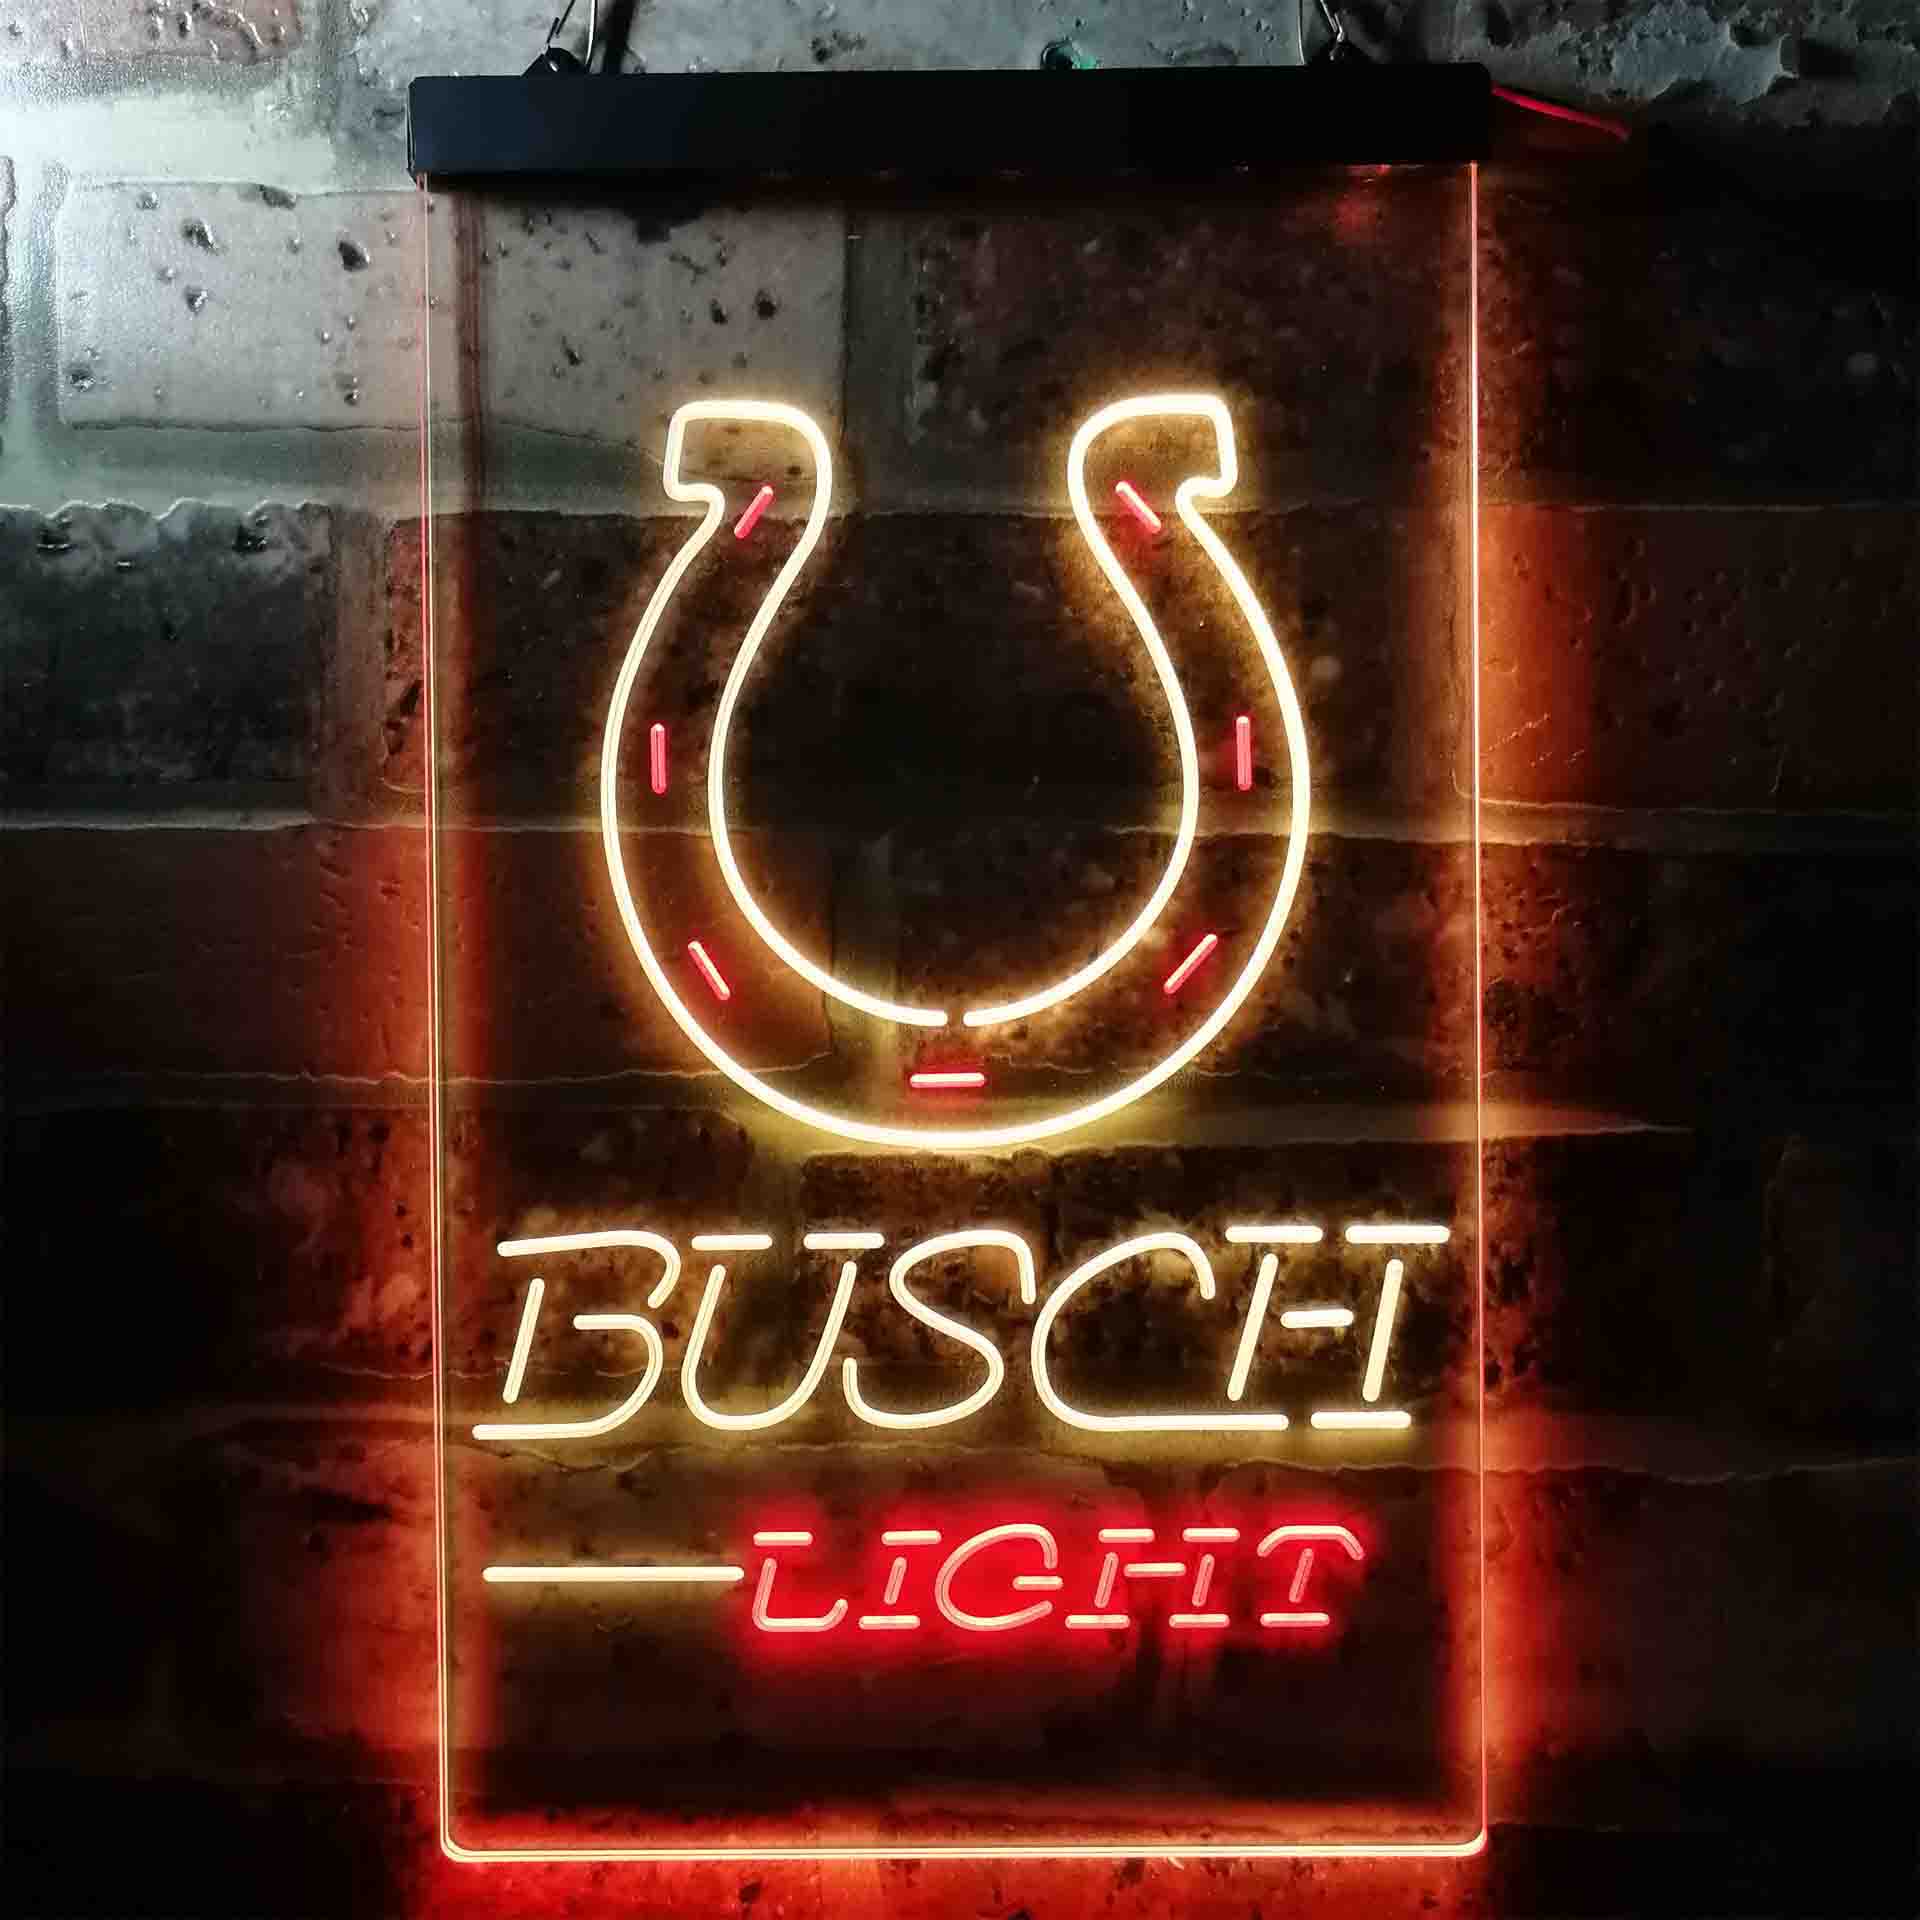 Indianapolis Colt Busch Light LED Neon Sign